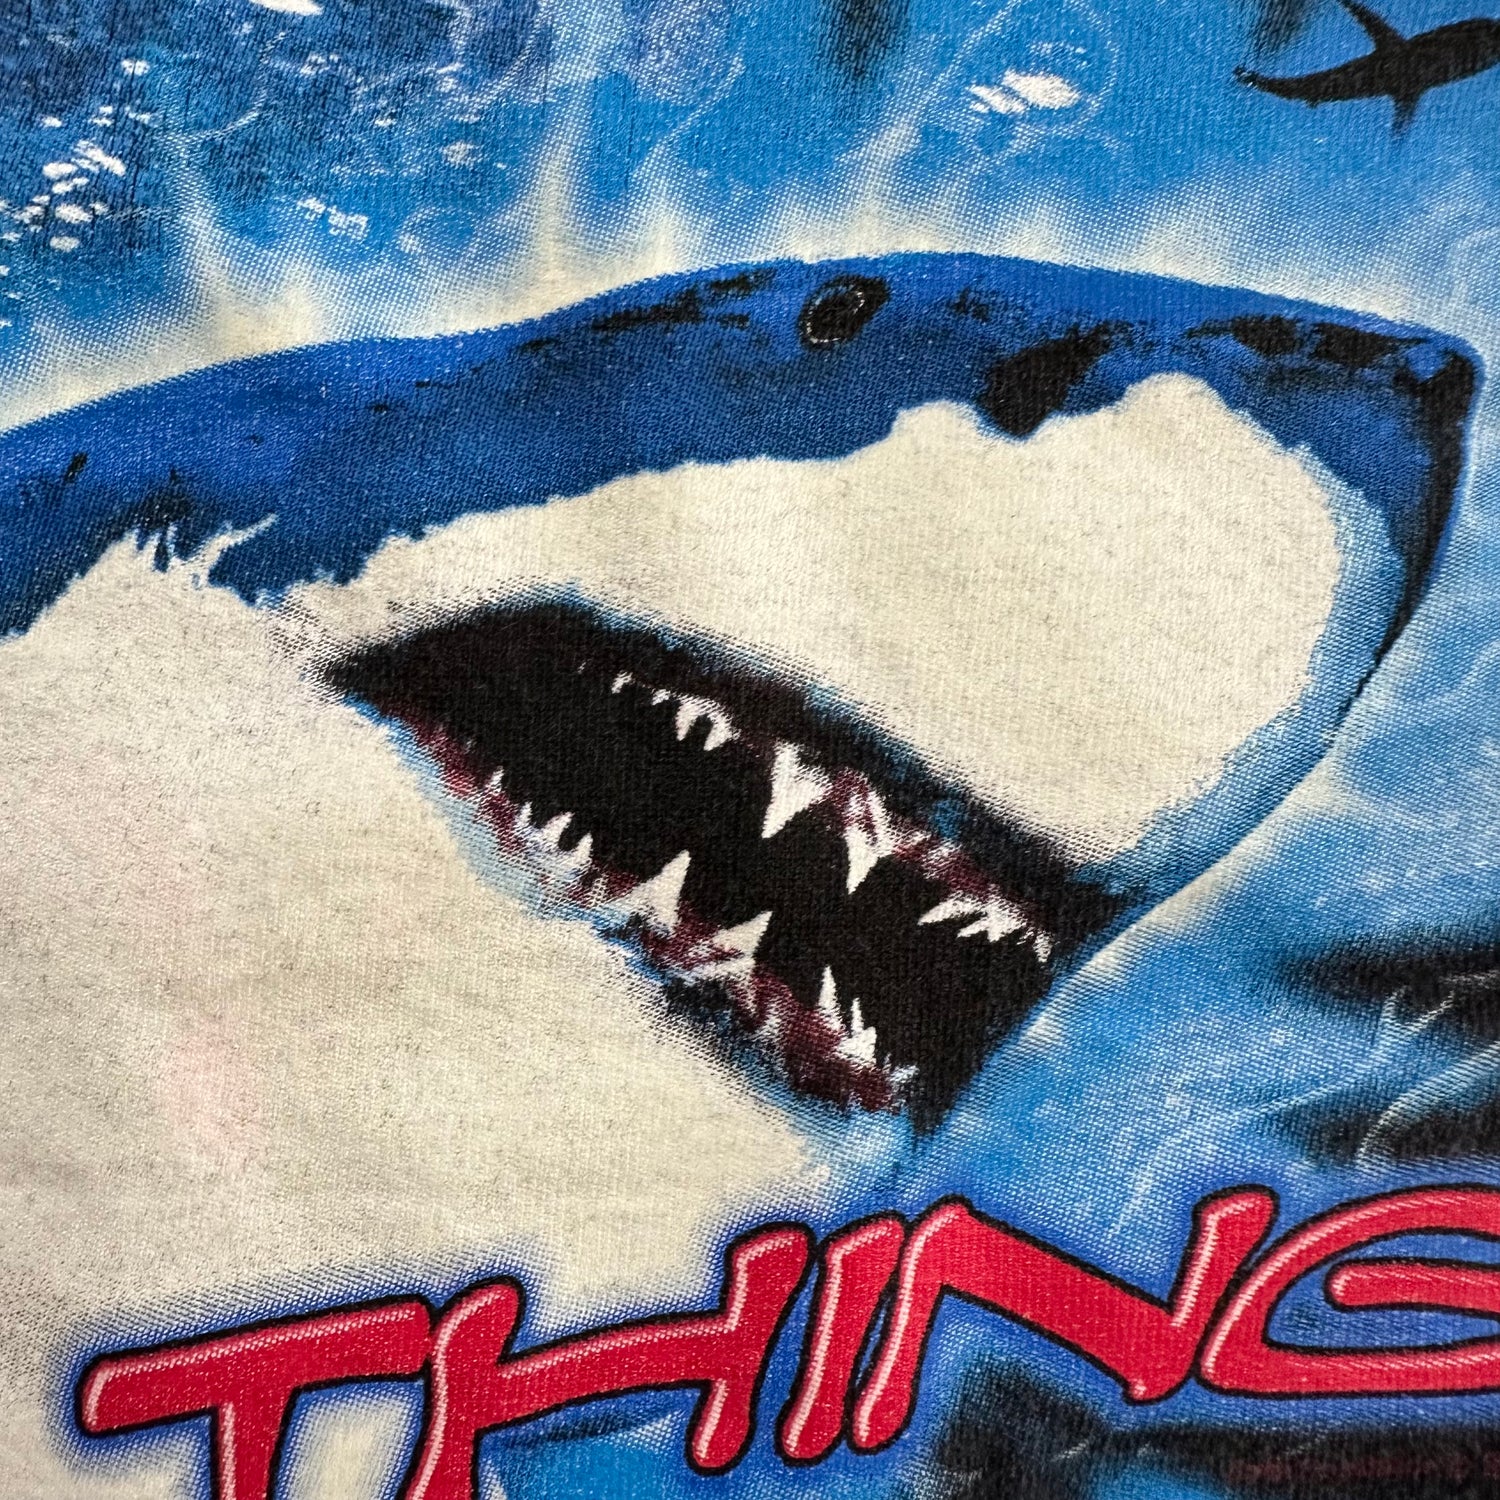 Vintage 1990s Shark T-shirt size Small